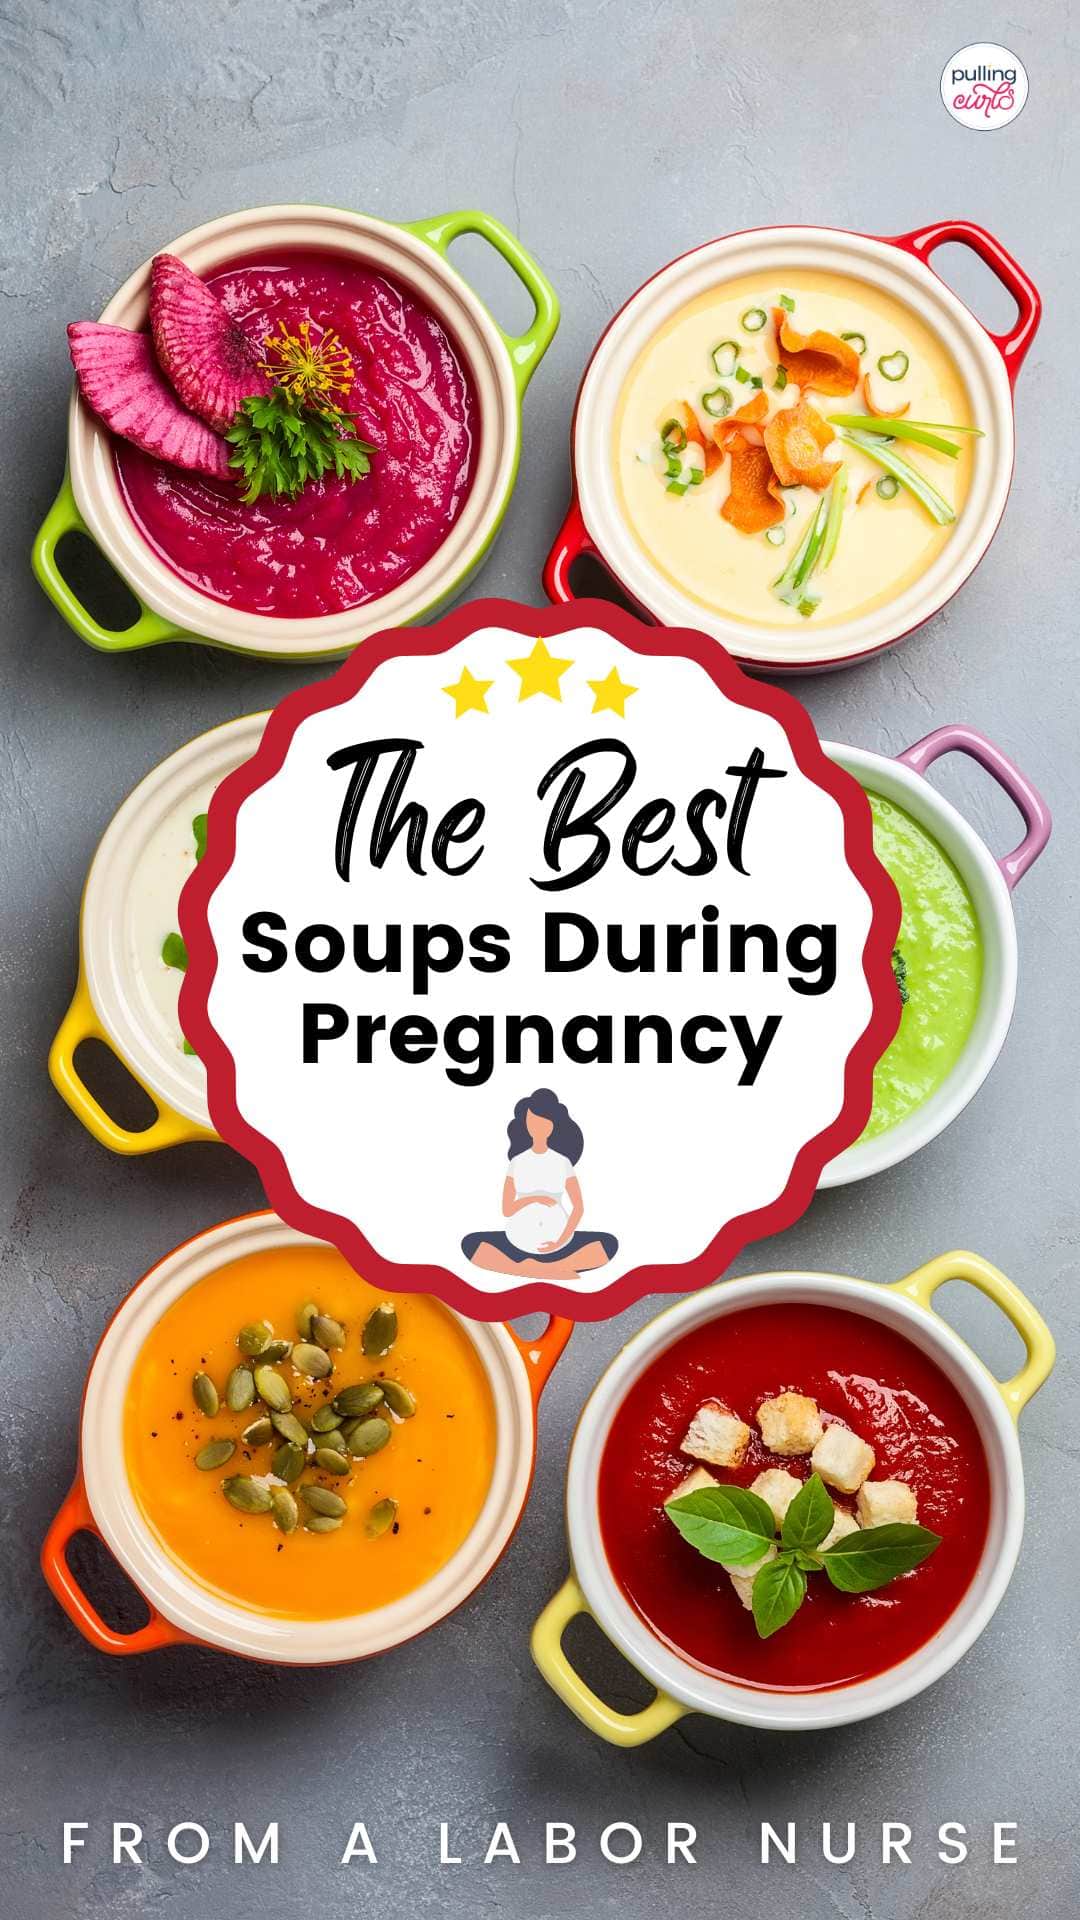 the best soups during pregnancy / picture of soups via @pullingcurls